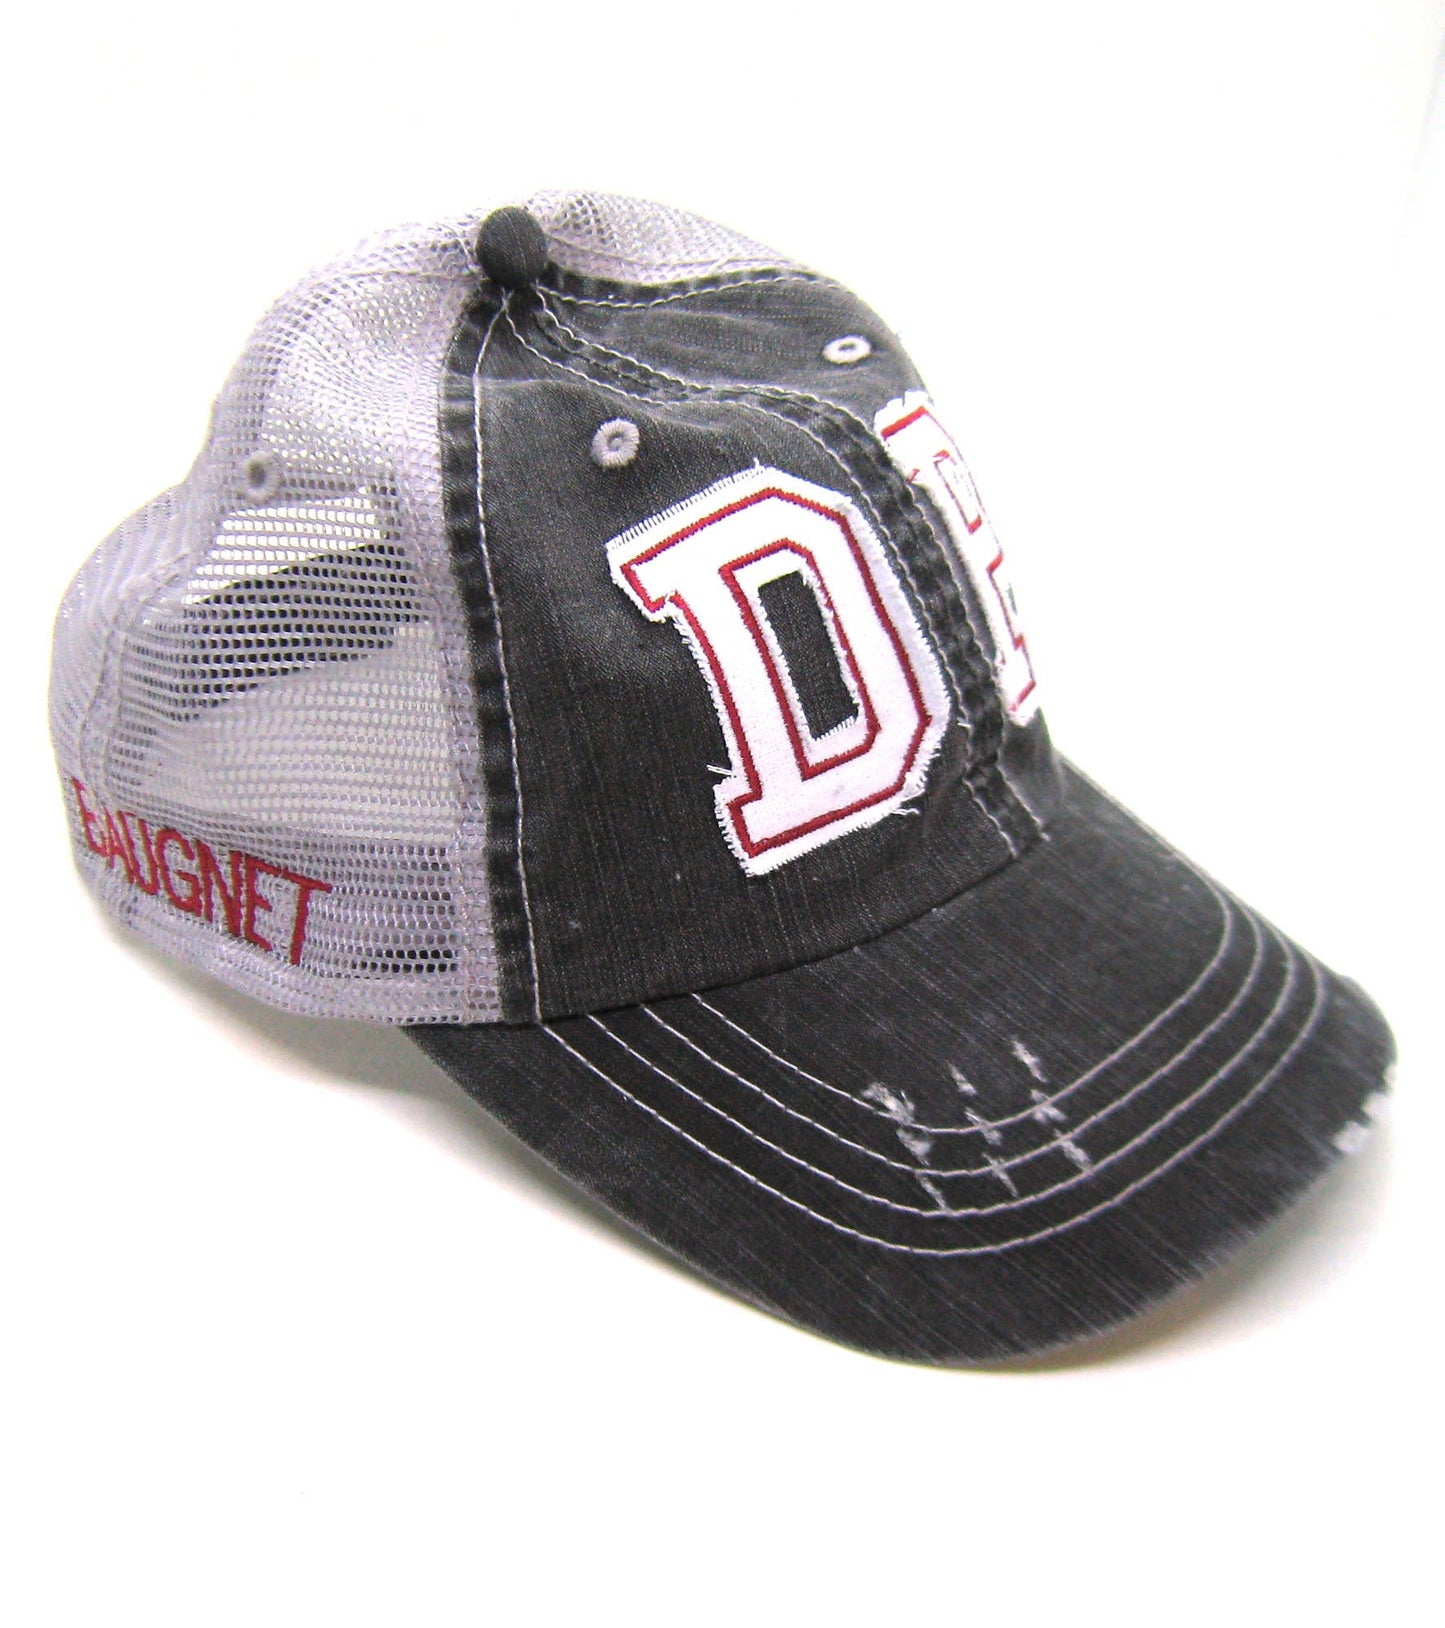 Gray Distressed Trucker Hat - DP De Pere Voyageur Hockey Hat - White Lettering with Cardinal Red Stitiching